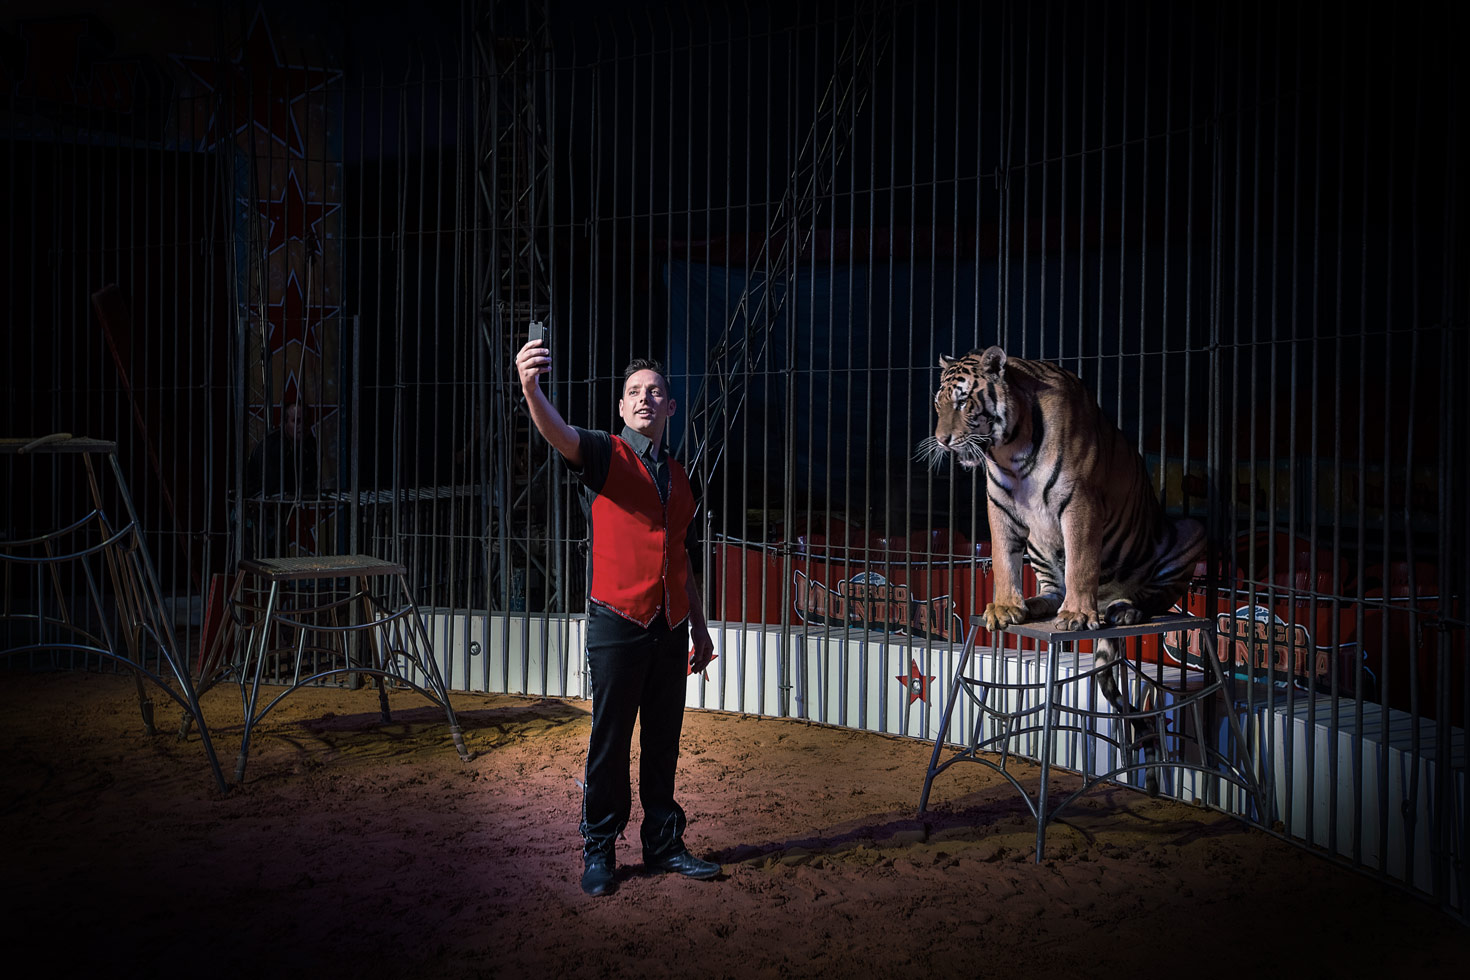 Storyteller Francisco Salgueiro captures both the backstage banality and the front-of-house excitement at circuses across Portugal.